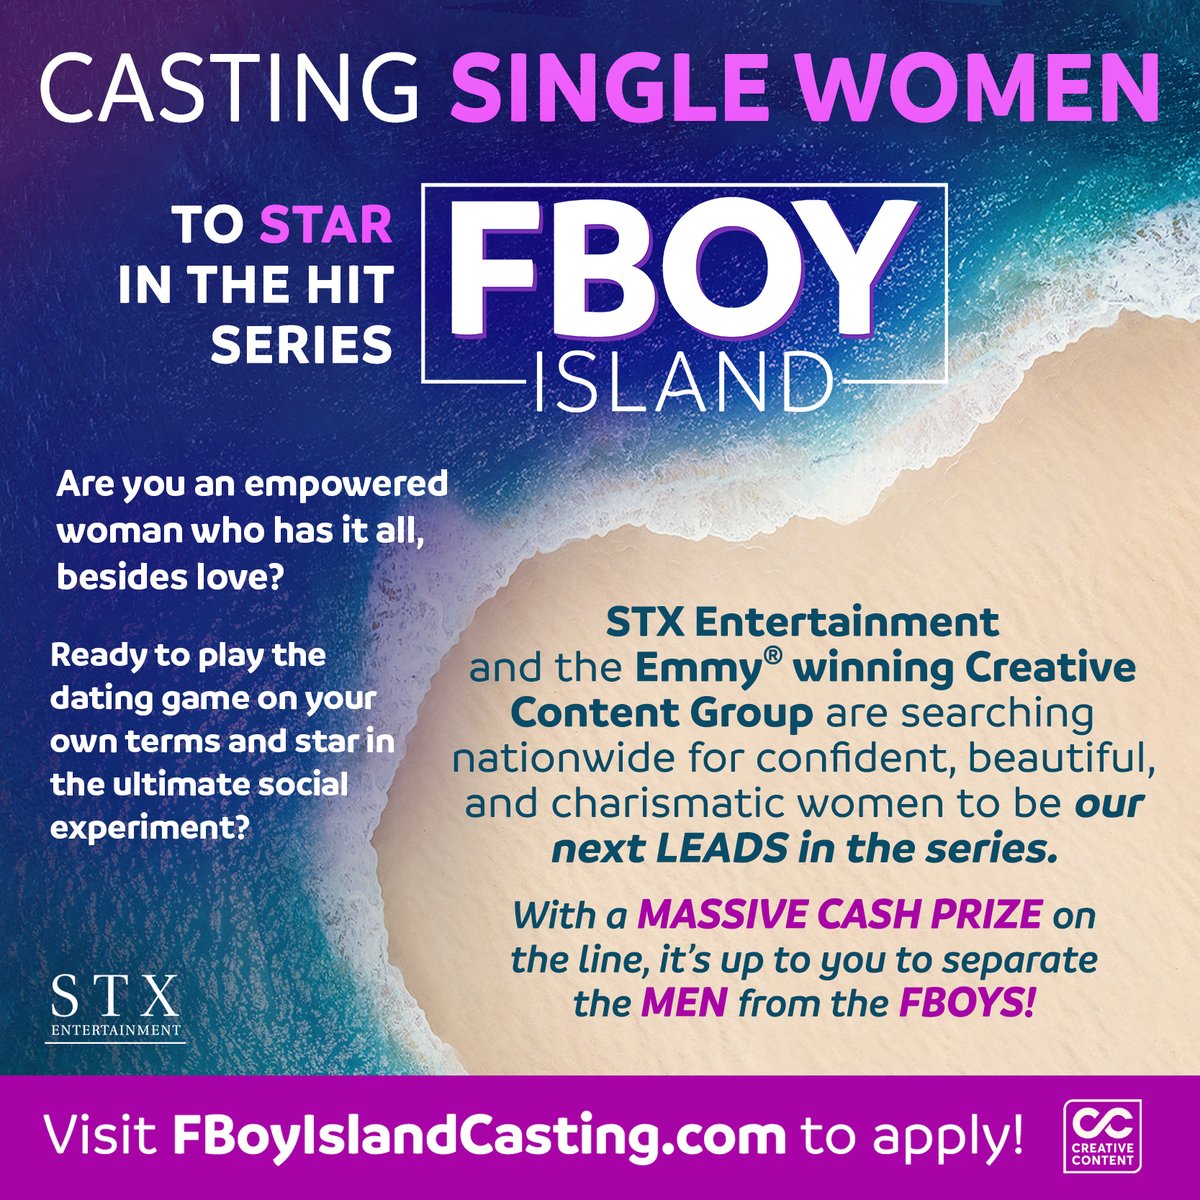 CASTING SINGLE WOMEN FOR HBO MAX DATING SERIES!